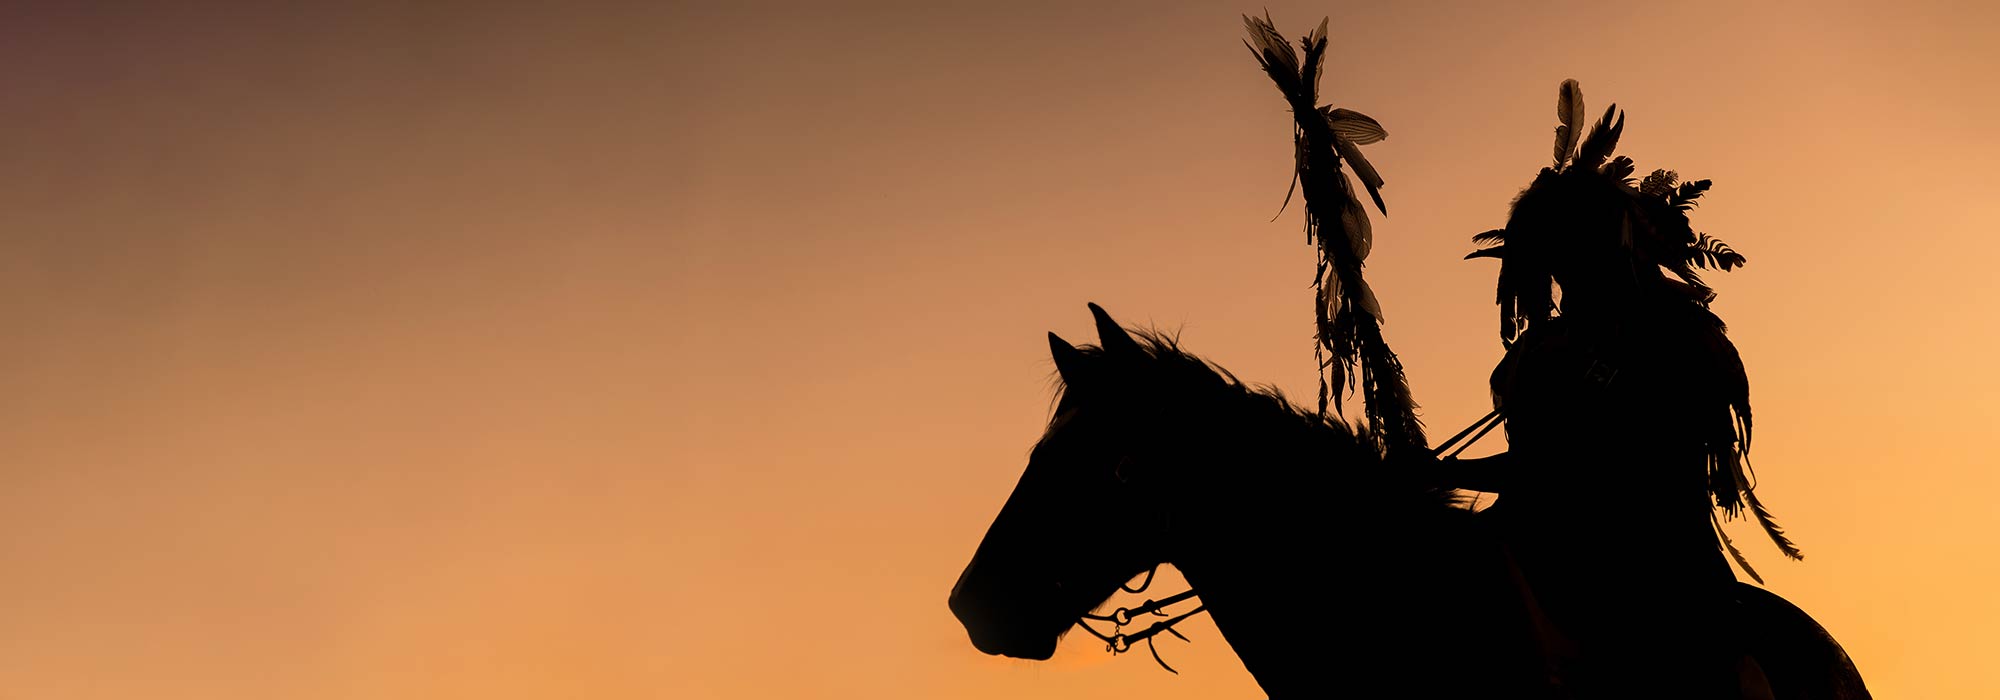 Native American on Horse